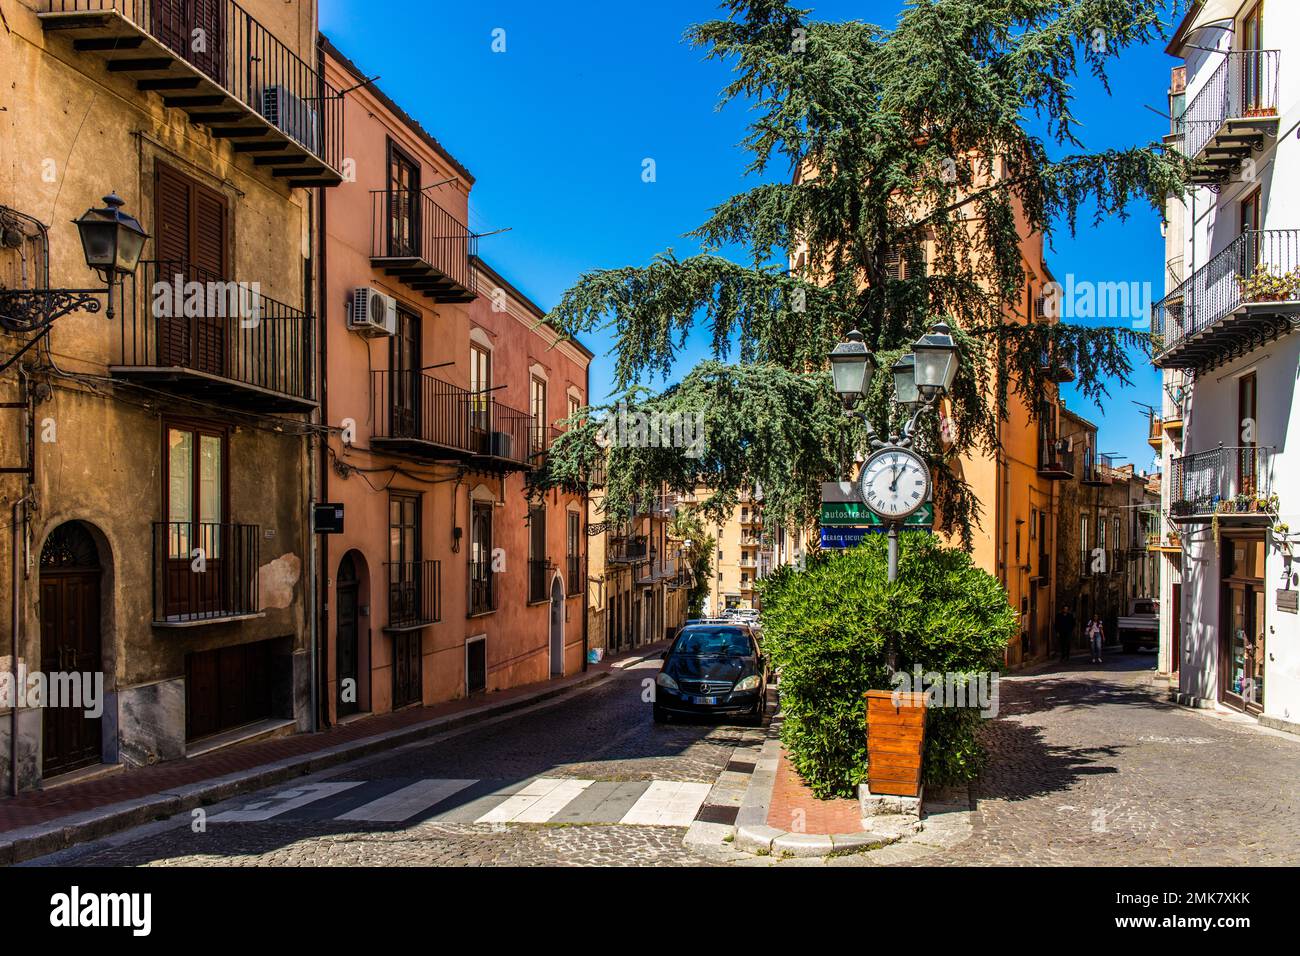 Castelbuono in the Madonie mountains with historic old town, Castelbuono, Sicily, Italy Stock Photo